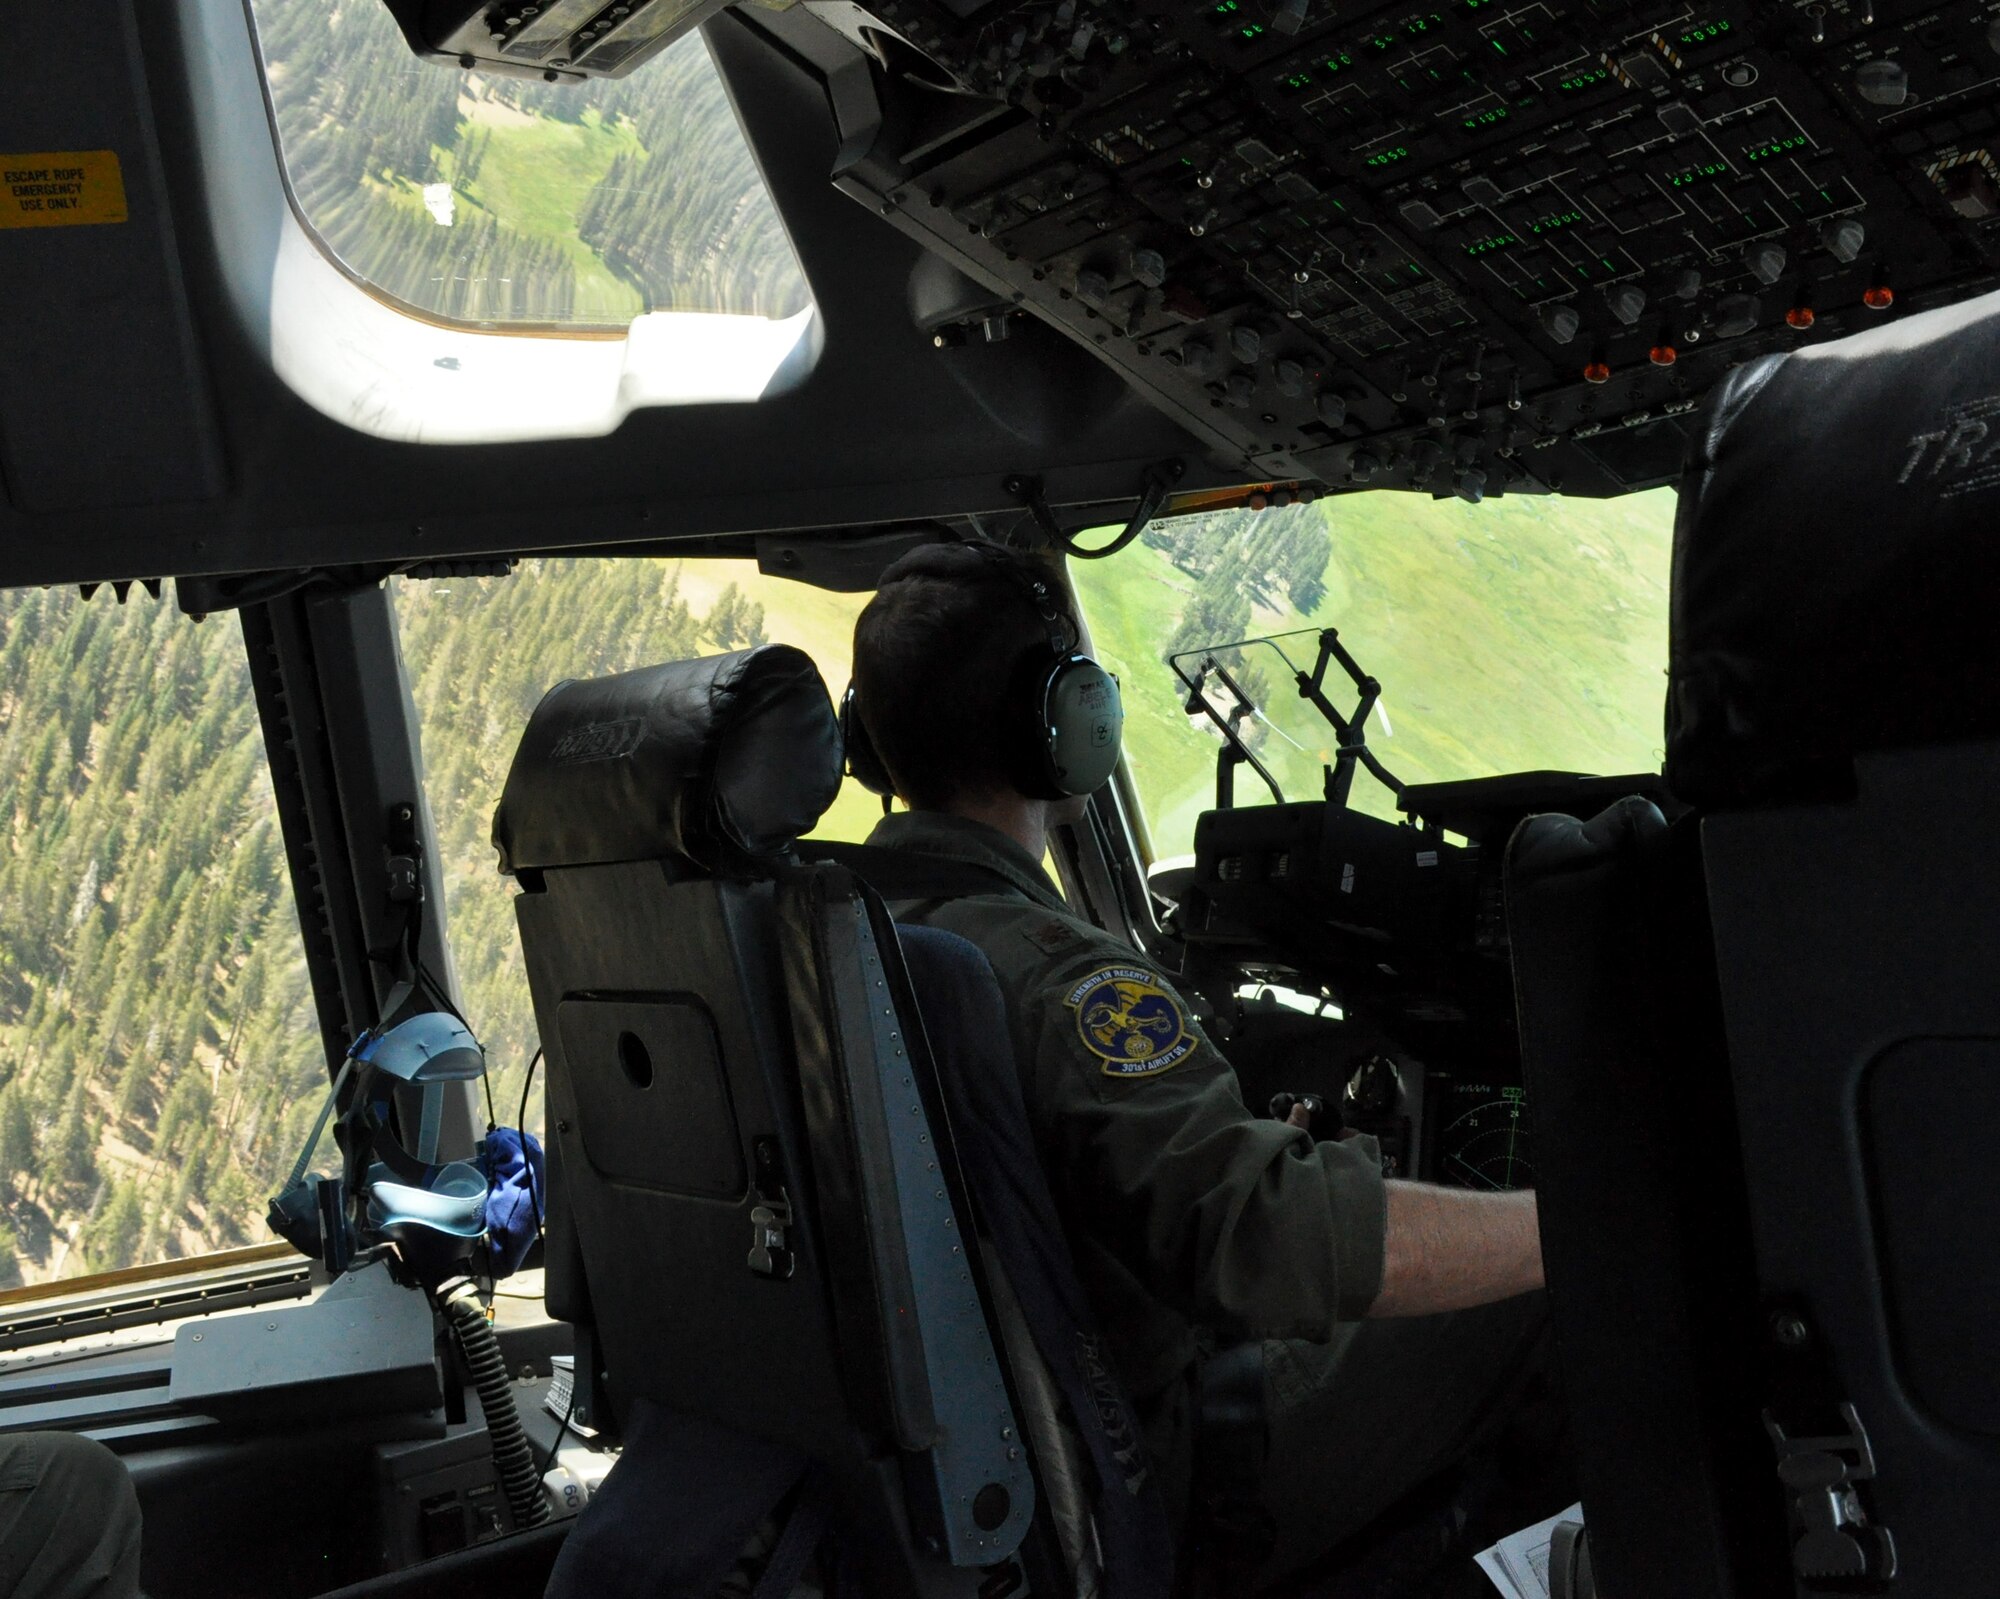 Maj. Matthew Abele, a 301st Airlift Squadron C-17 Globemaster III pilot, performs low-level flying and terrain-masking techniques over northern California on July 22, 2017. The flight was performed in conjunction with the 349th Air Mobilty Wing's Patriot Wyvern exercise. (U.S. Air Force photo by Senior Airman Shelby R. Horn/Released)